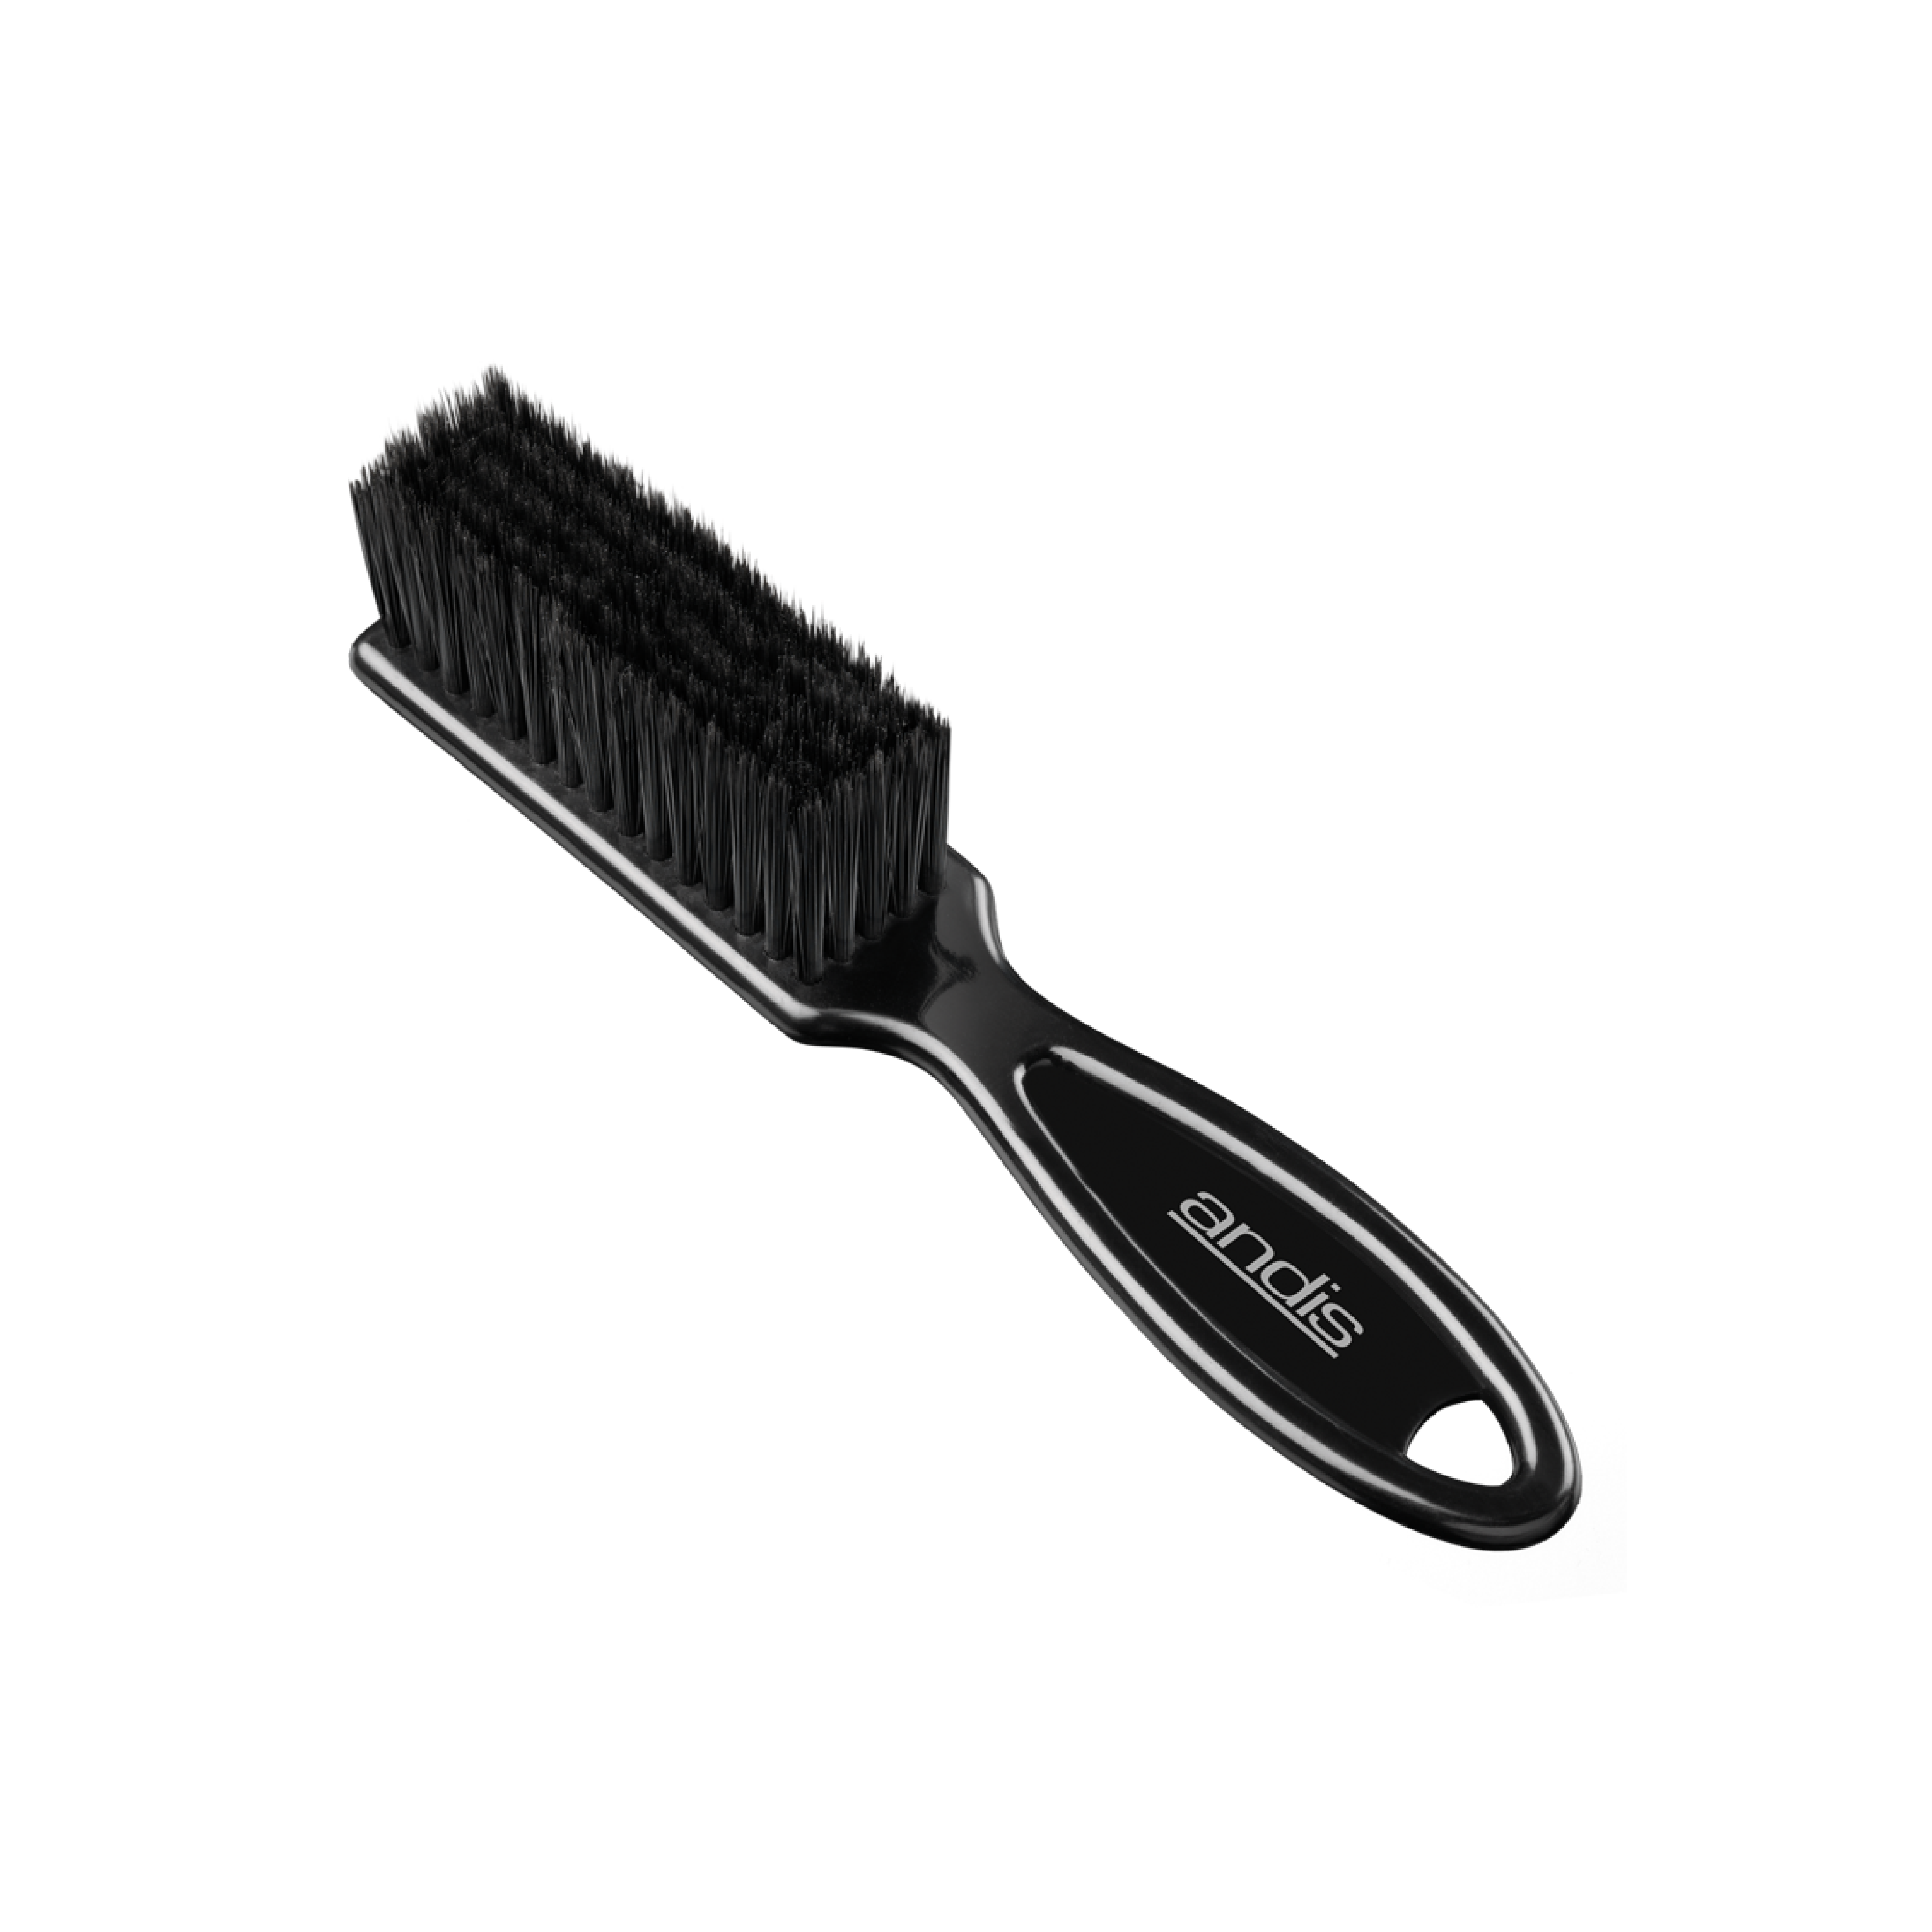 Andis Blade Cleaning Brush - 12415